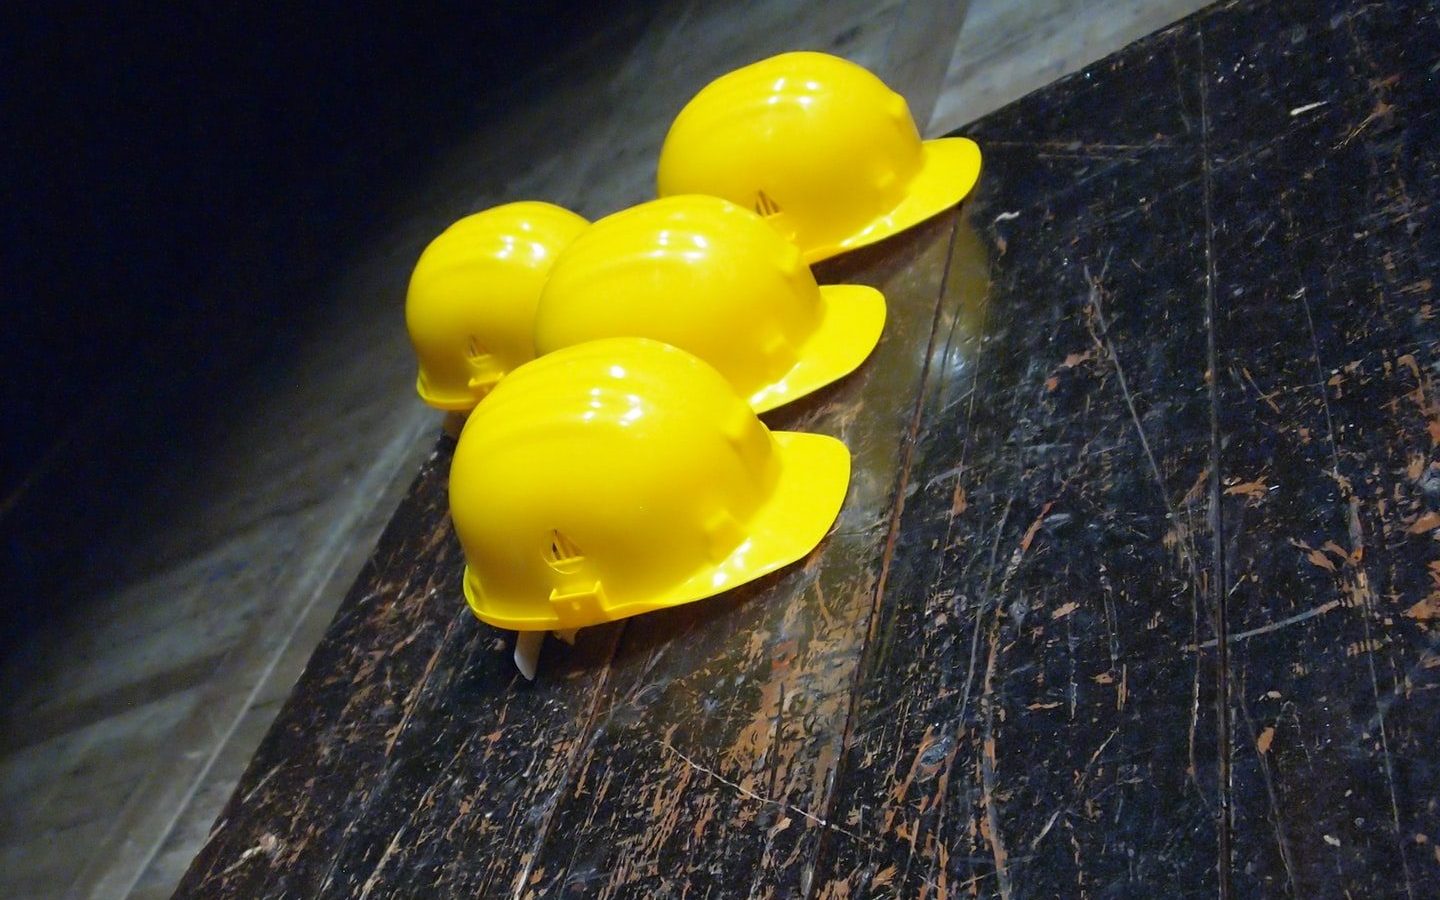 five yellow hard hats on gray surface